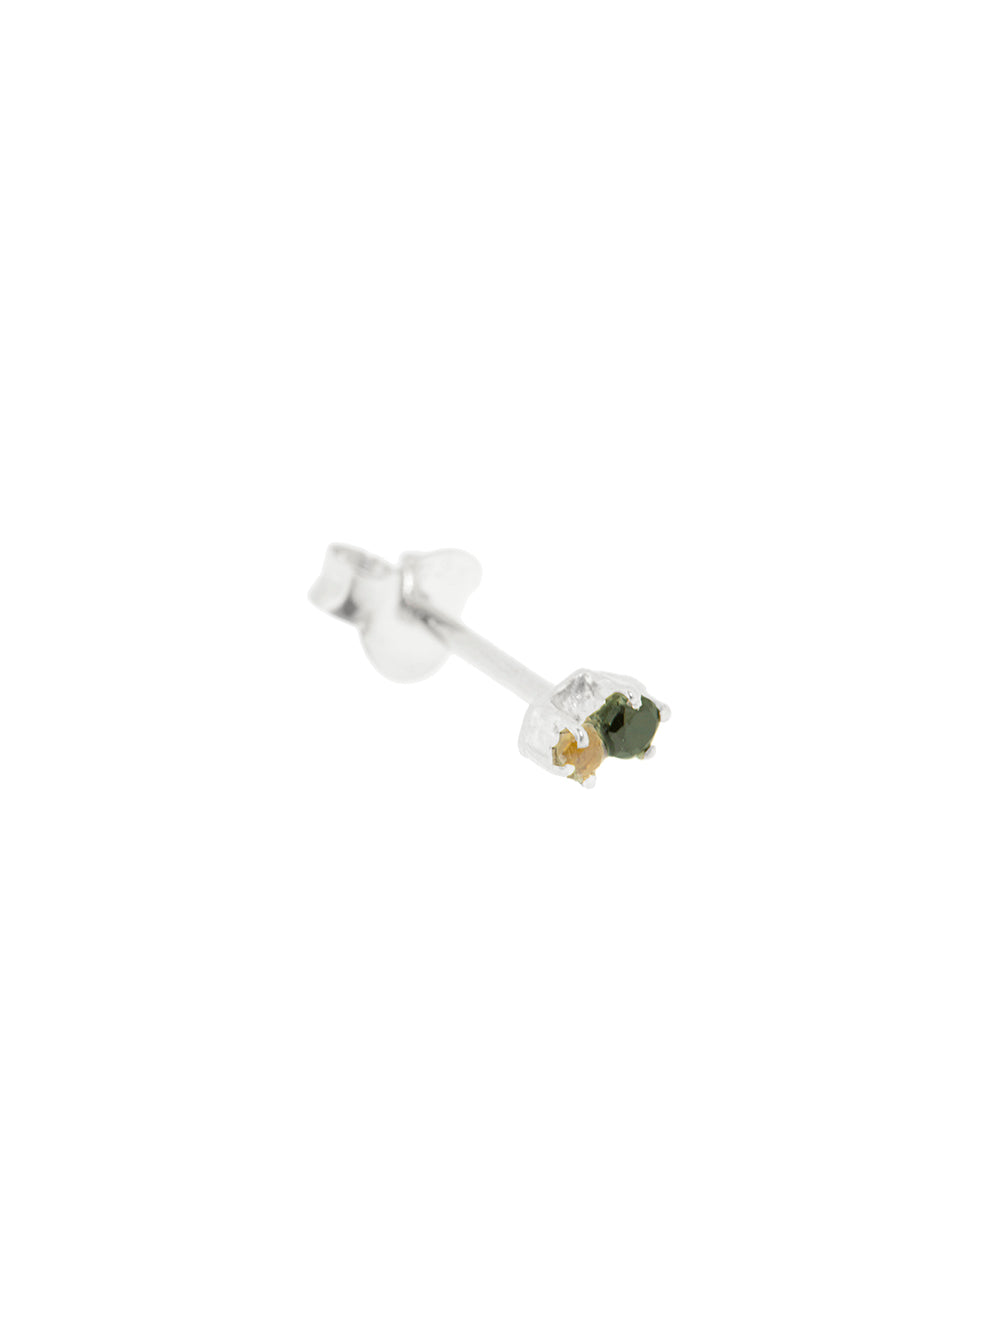 Both of us Green tourmaline | 925 Sterling Silver